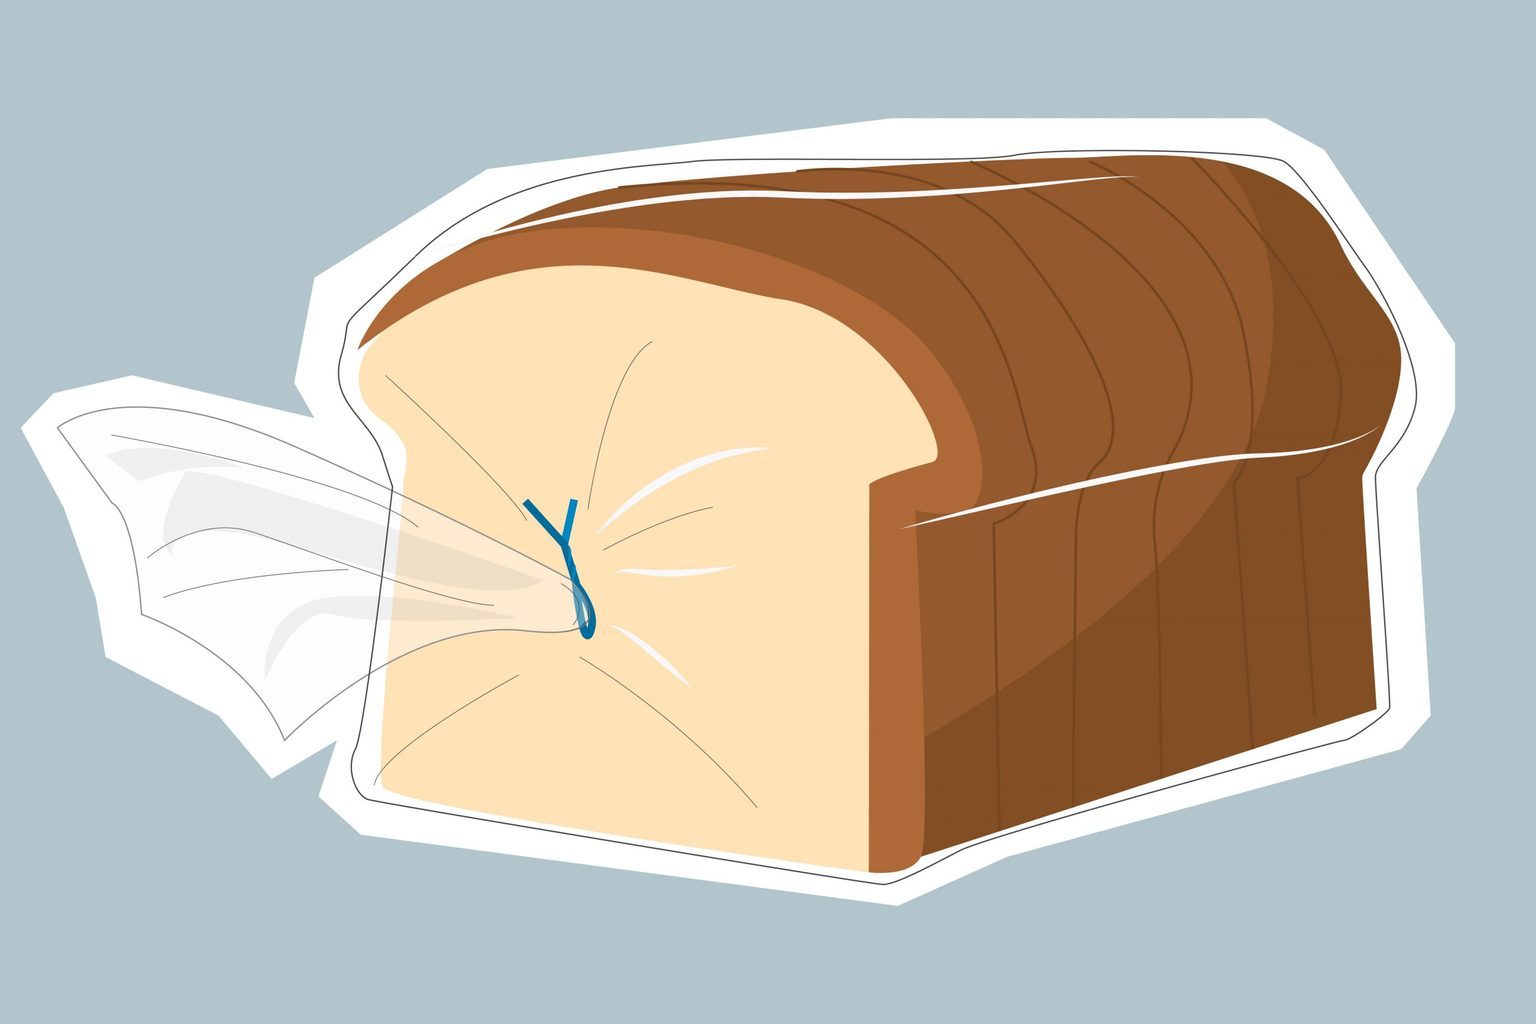 Bread Is Sold In Brown Paper Bags For A Reason. Here's Why